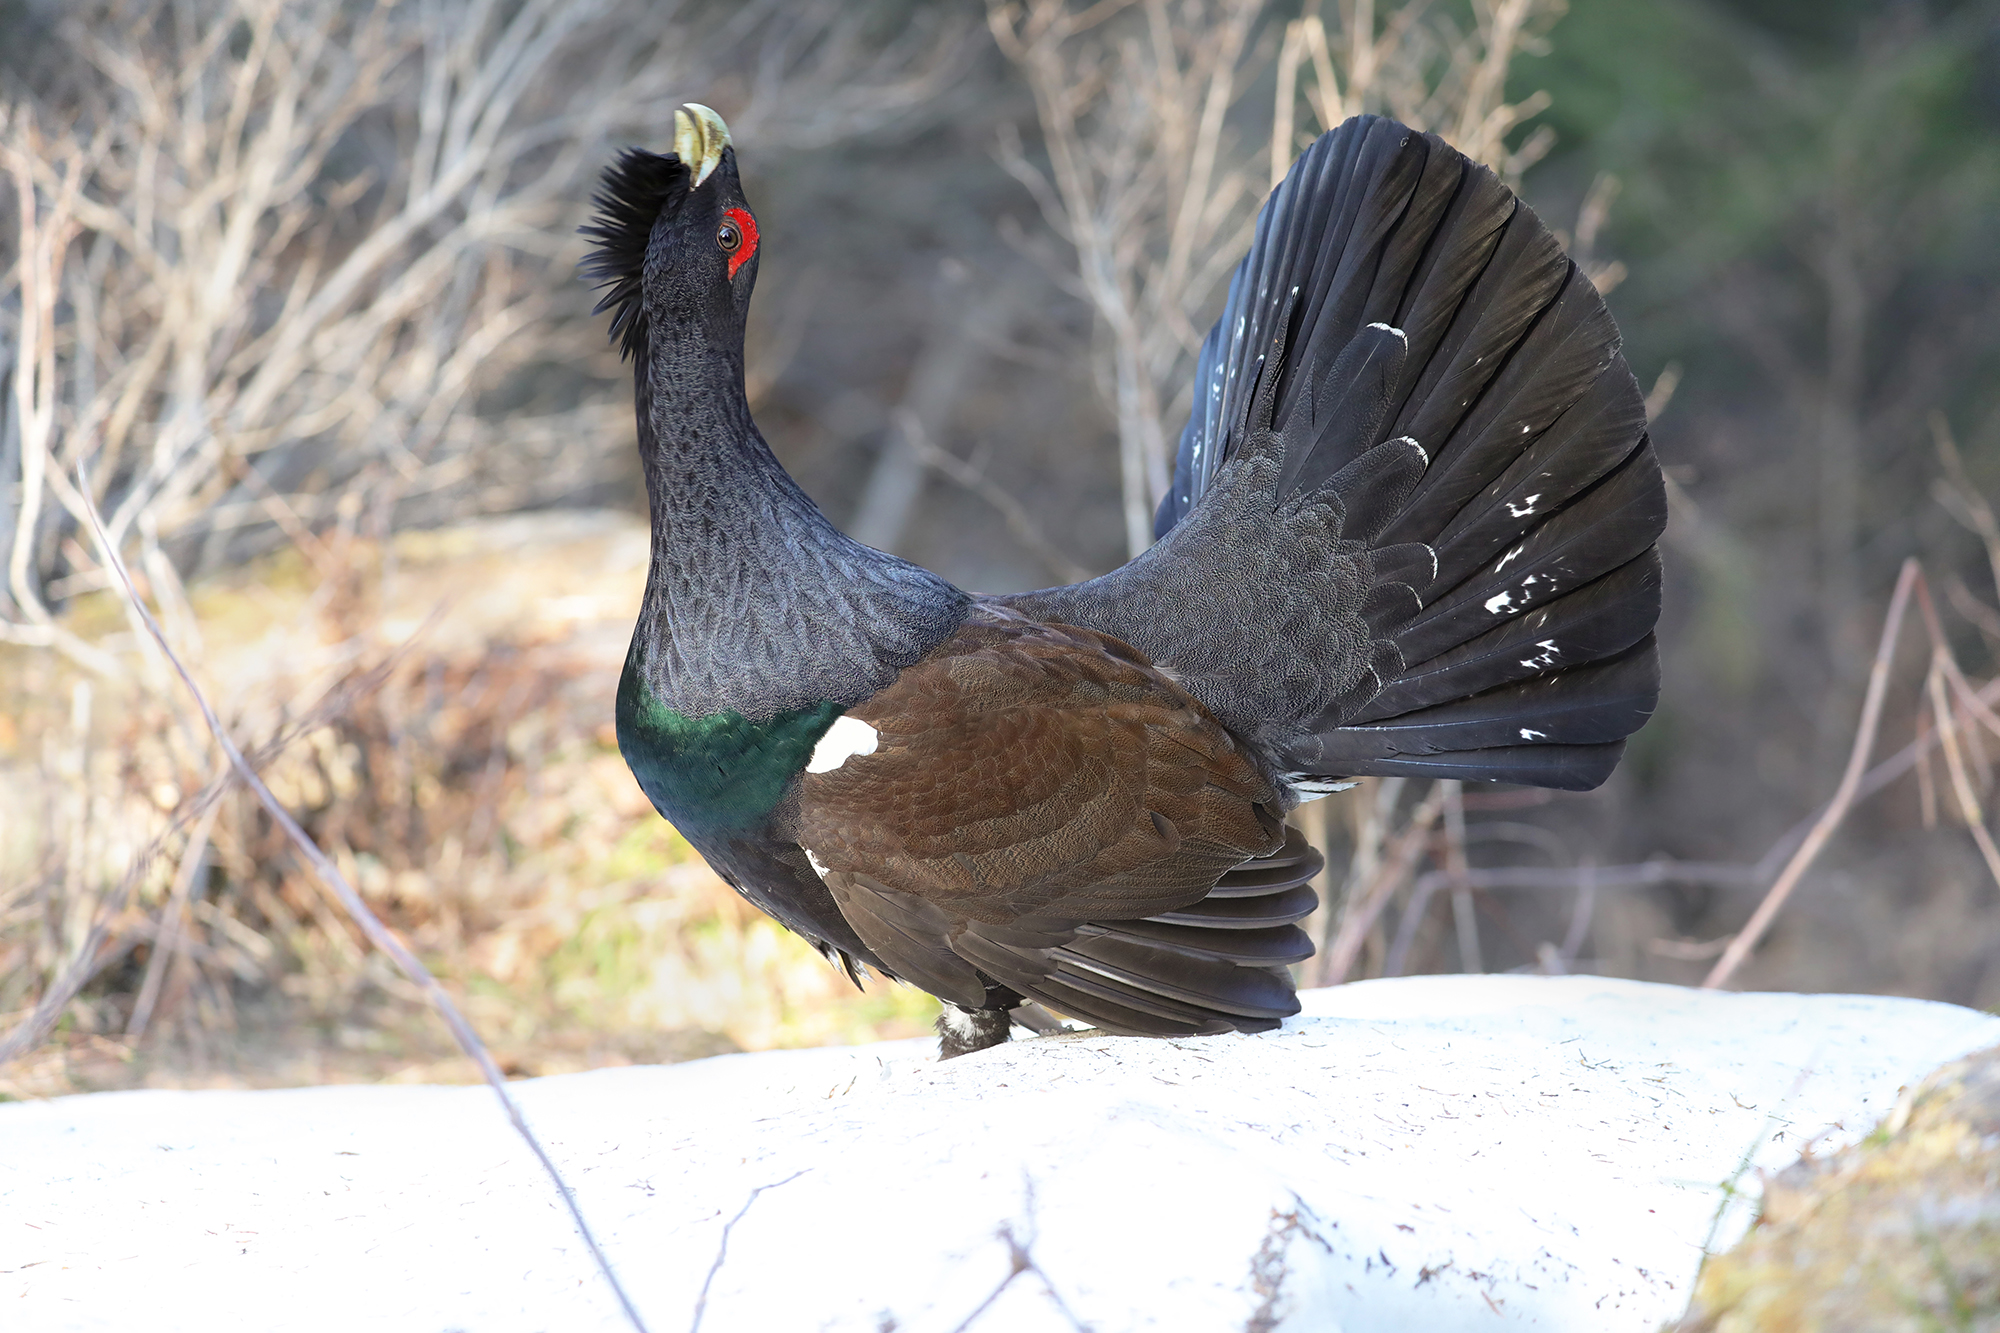 at the height of excitement, capercaillie...